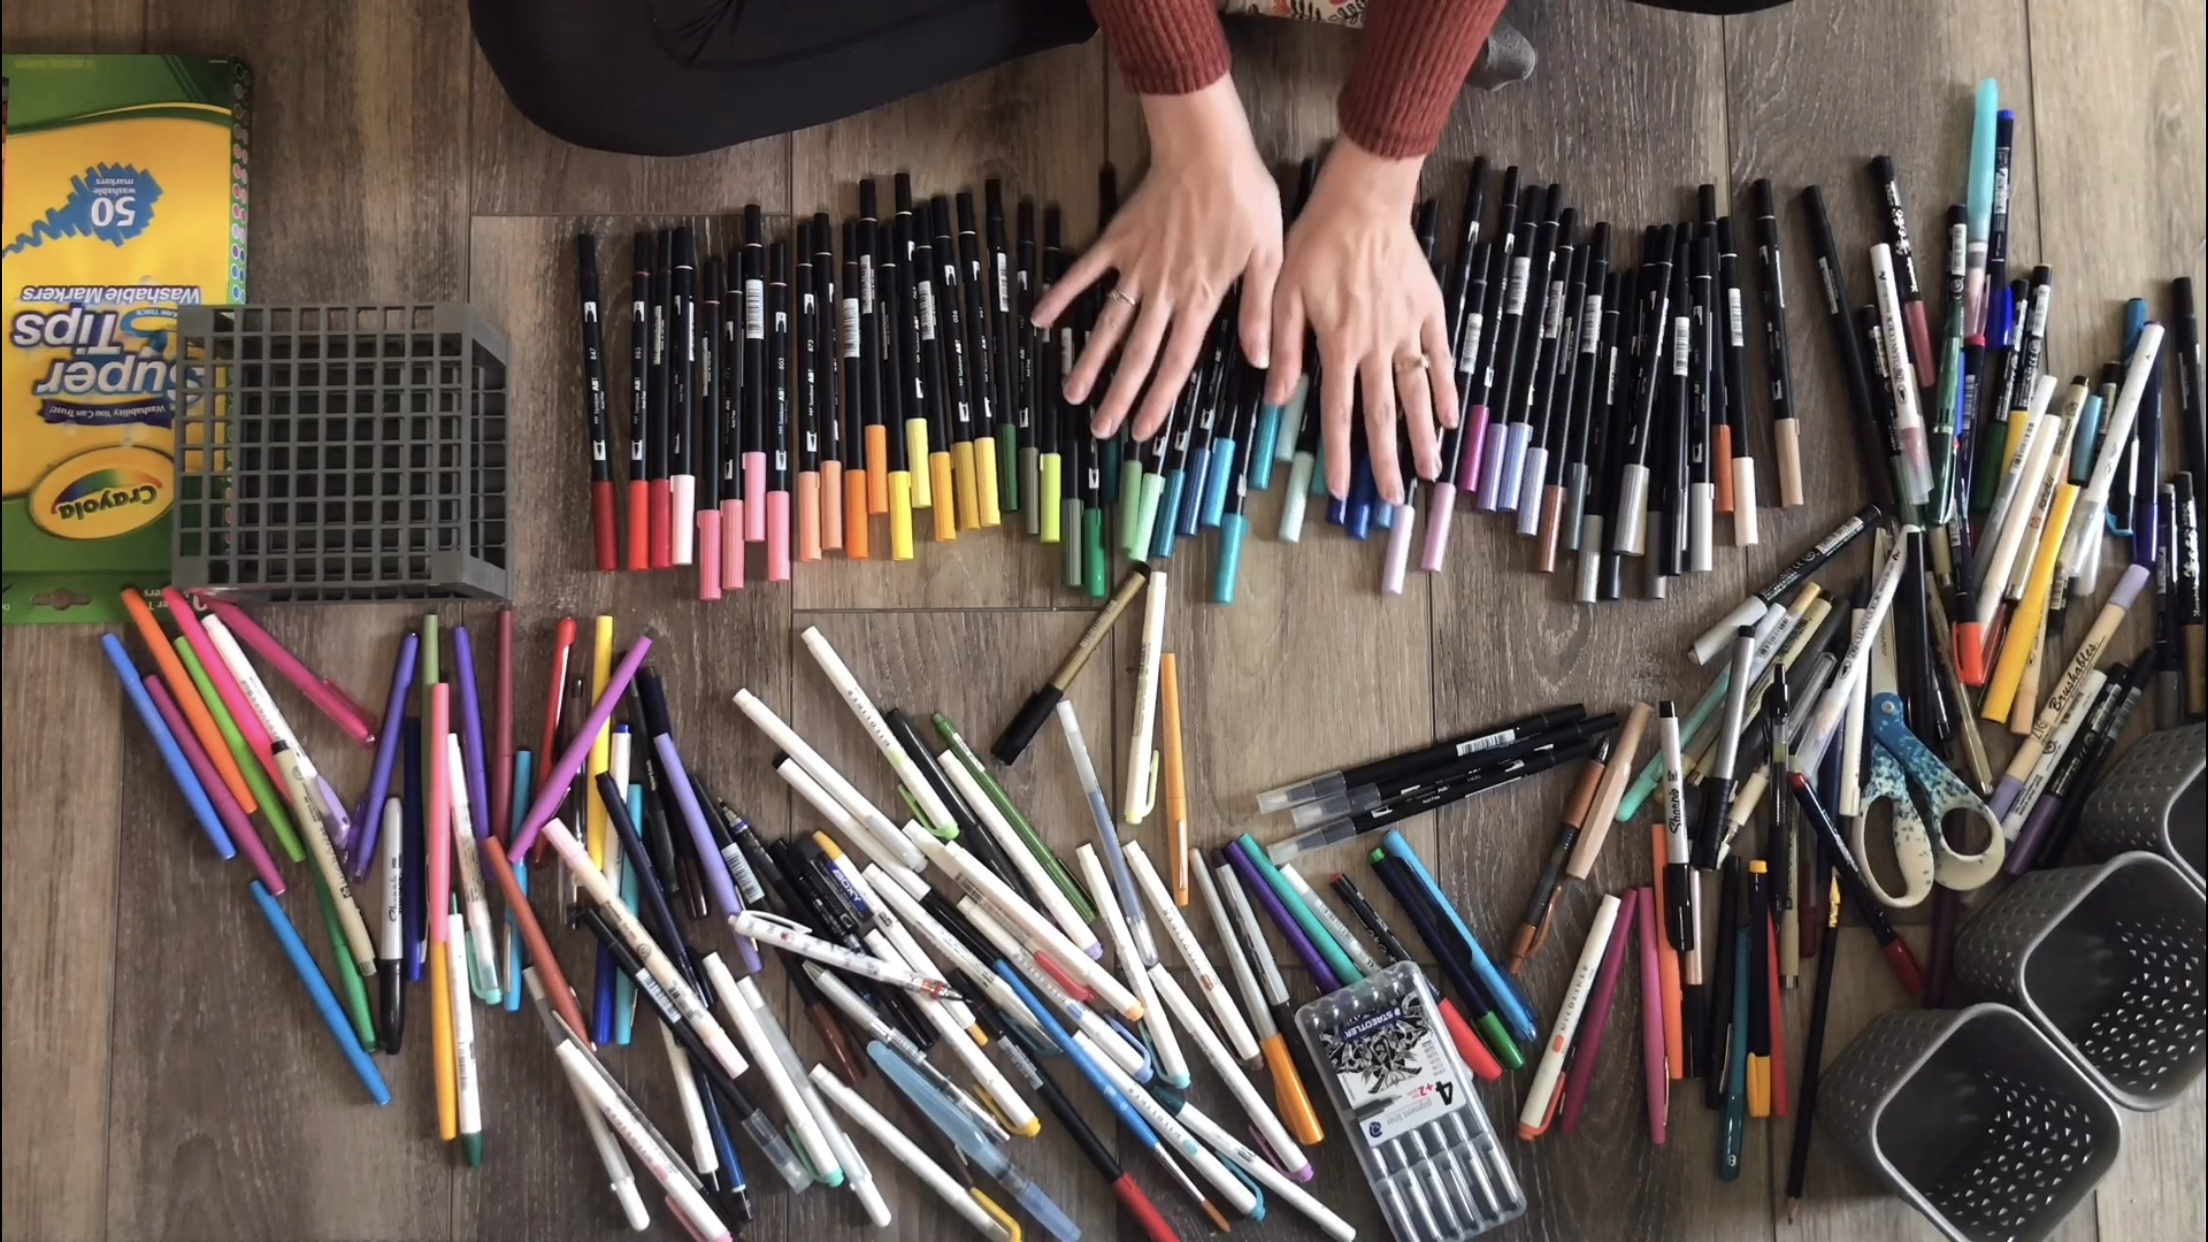 Organizing My Huge Pen Collection - Rae's Daily Page